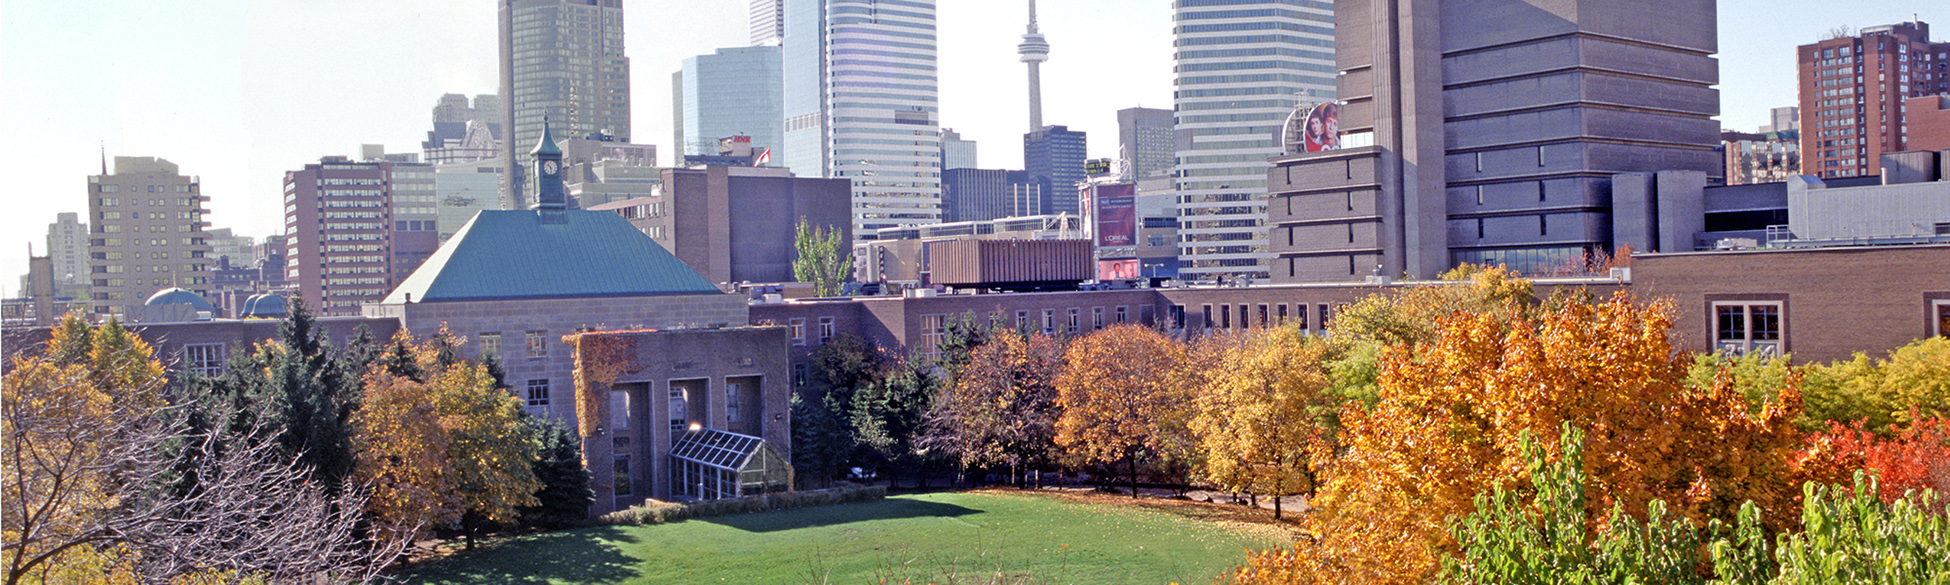 Ryerson fall campus with city skyline